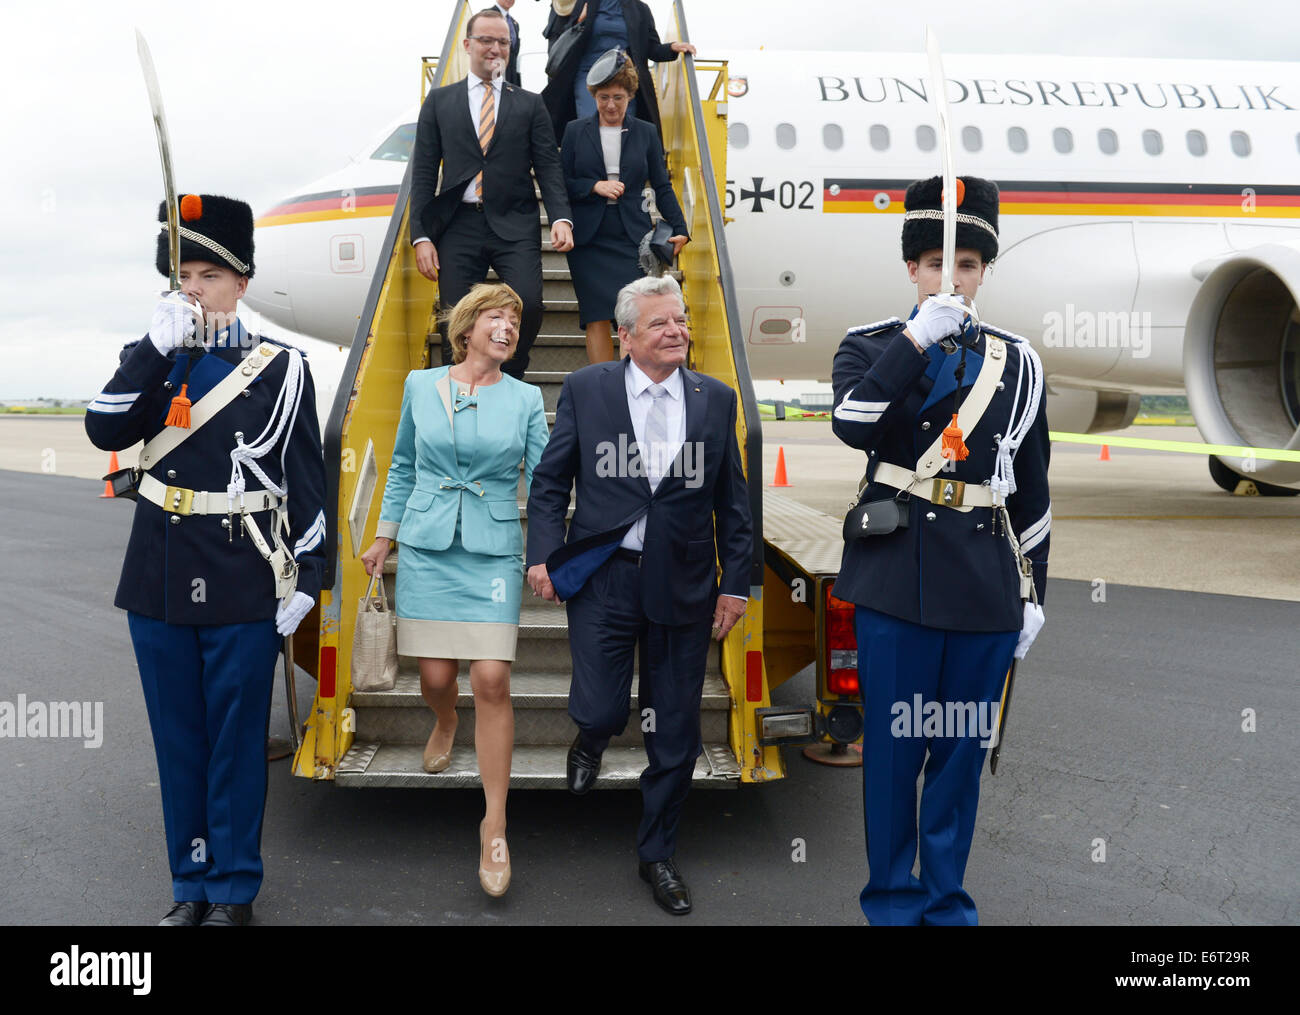 Maastricht, Germany. 30th Aug, 2014. German President Joachim Gauck and his partner Daniela Schadt alight from a government plane at Maastricht-Aachen Airport in Maastricht, Germany, 30 August 2014. The attend the festivities on the occasion of the 200th jubilee of the Kingdom of the Netherlands. Photo: RAINER JENSEN/DPA/Alamy Live News Stock Photo